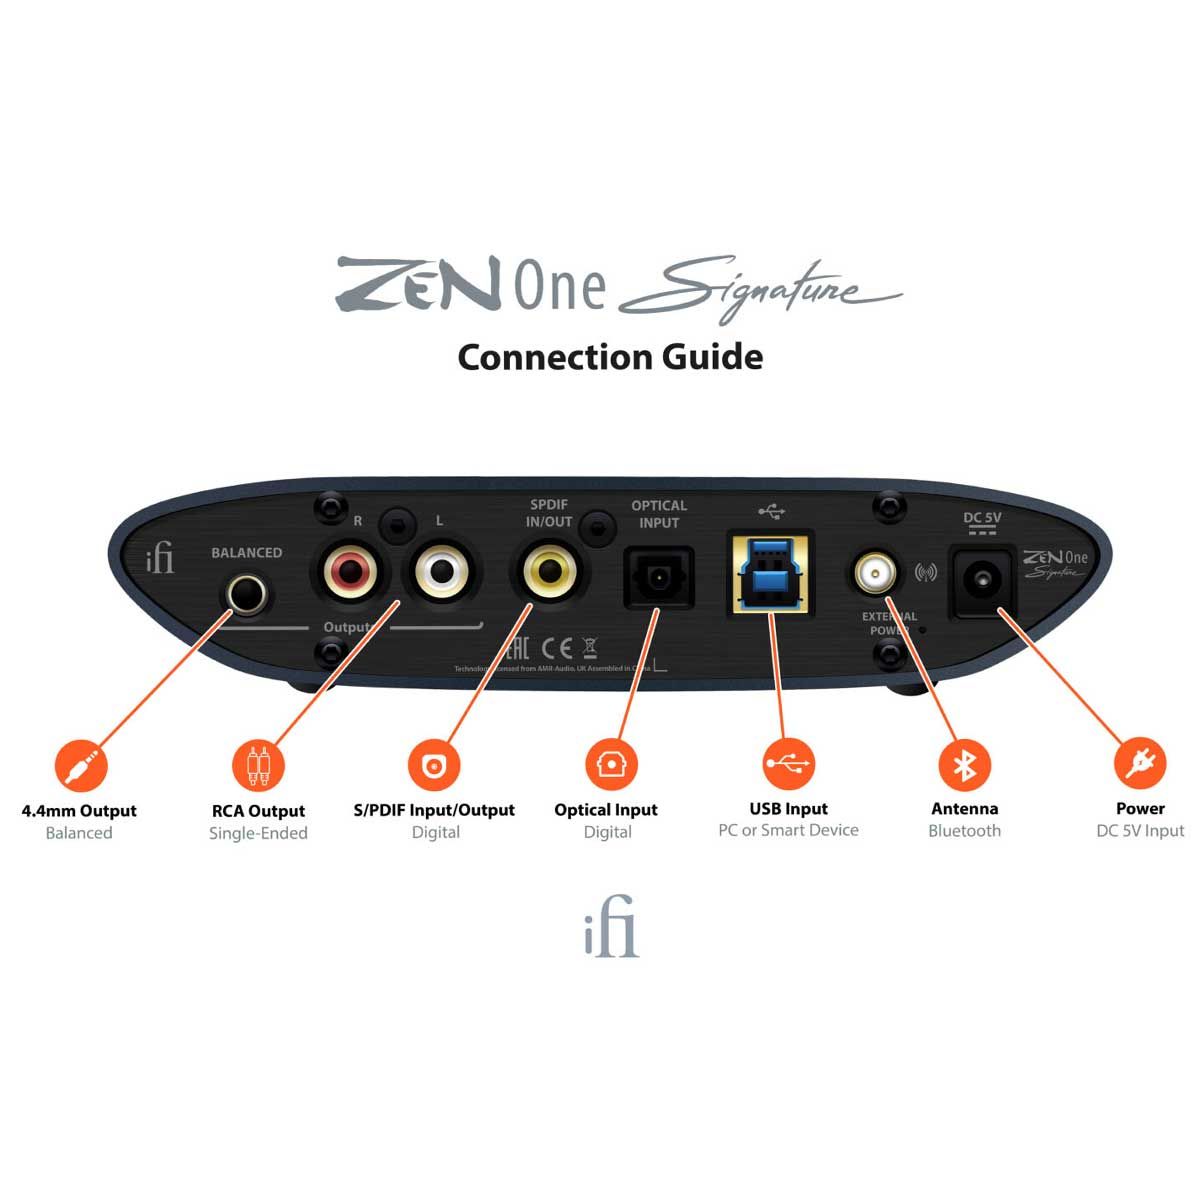 Close-up view of ifi Audio Zen One Signature rear panel with connection guide illustrations.